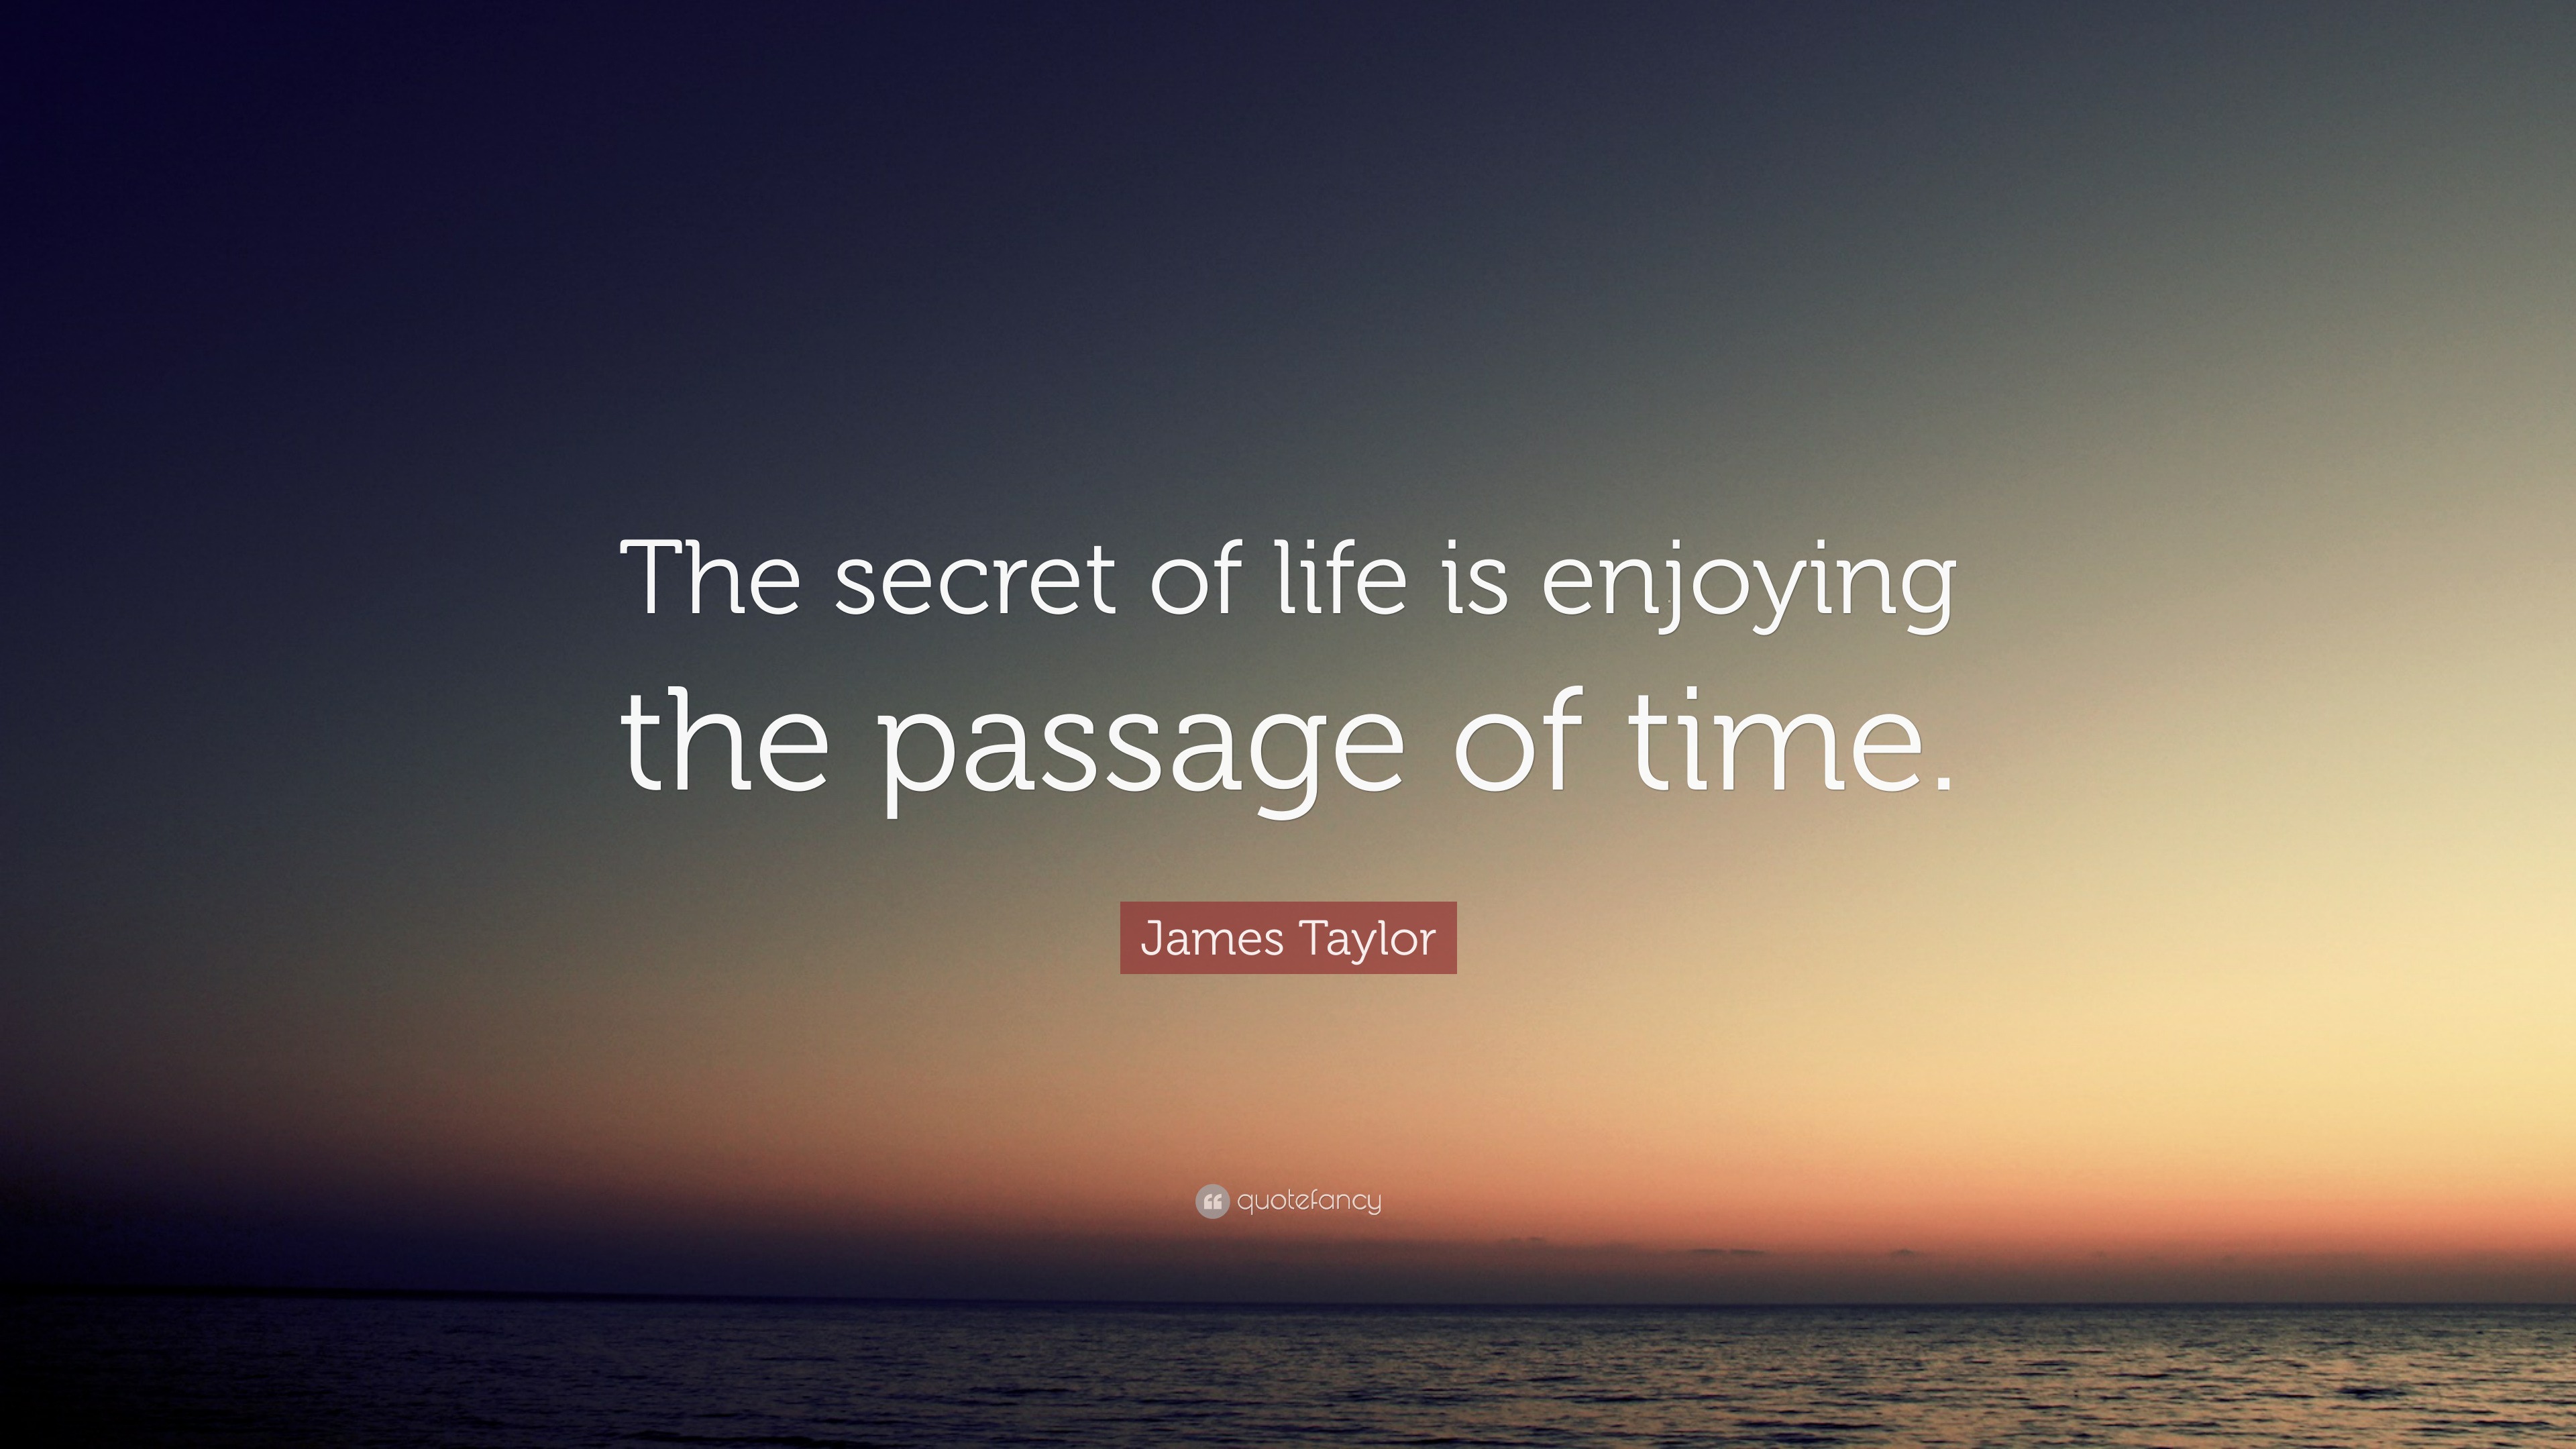 James Taylor Quote The Secret Of Life Is Enjoying The Passage Of Time